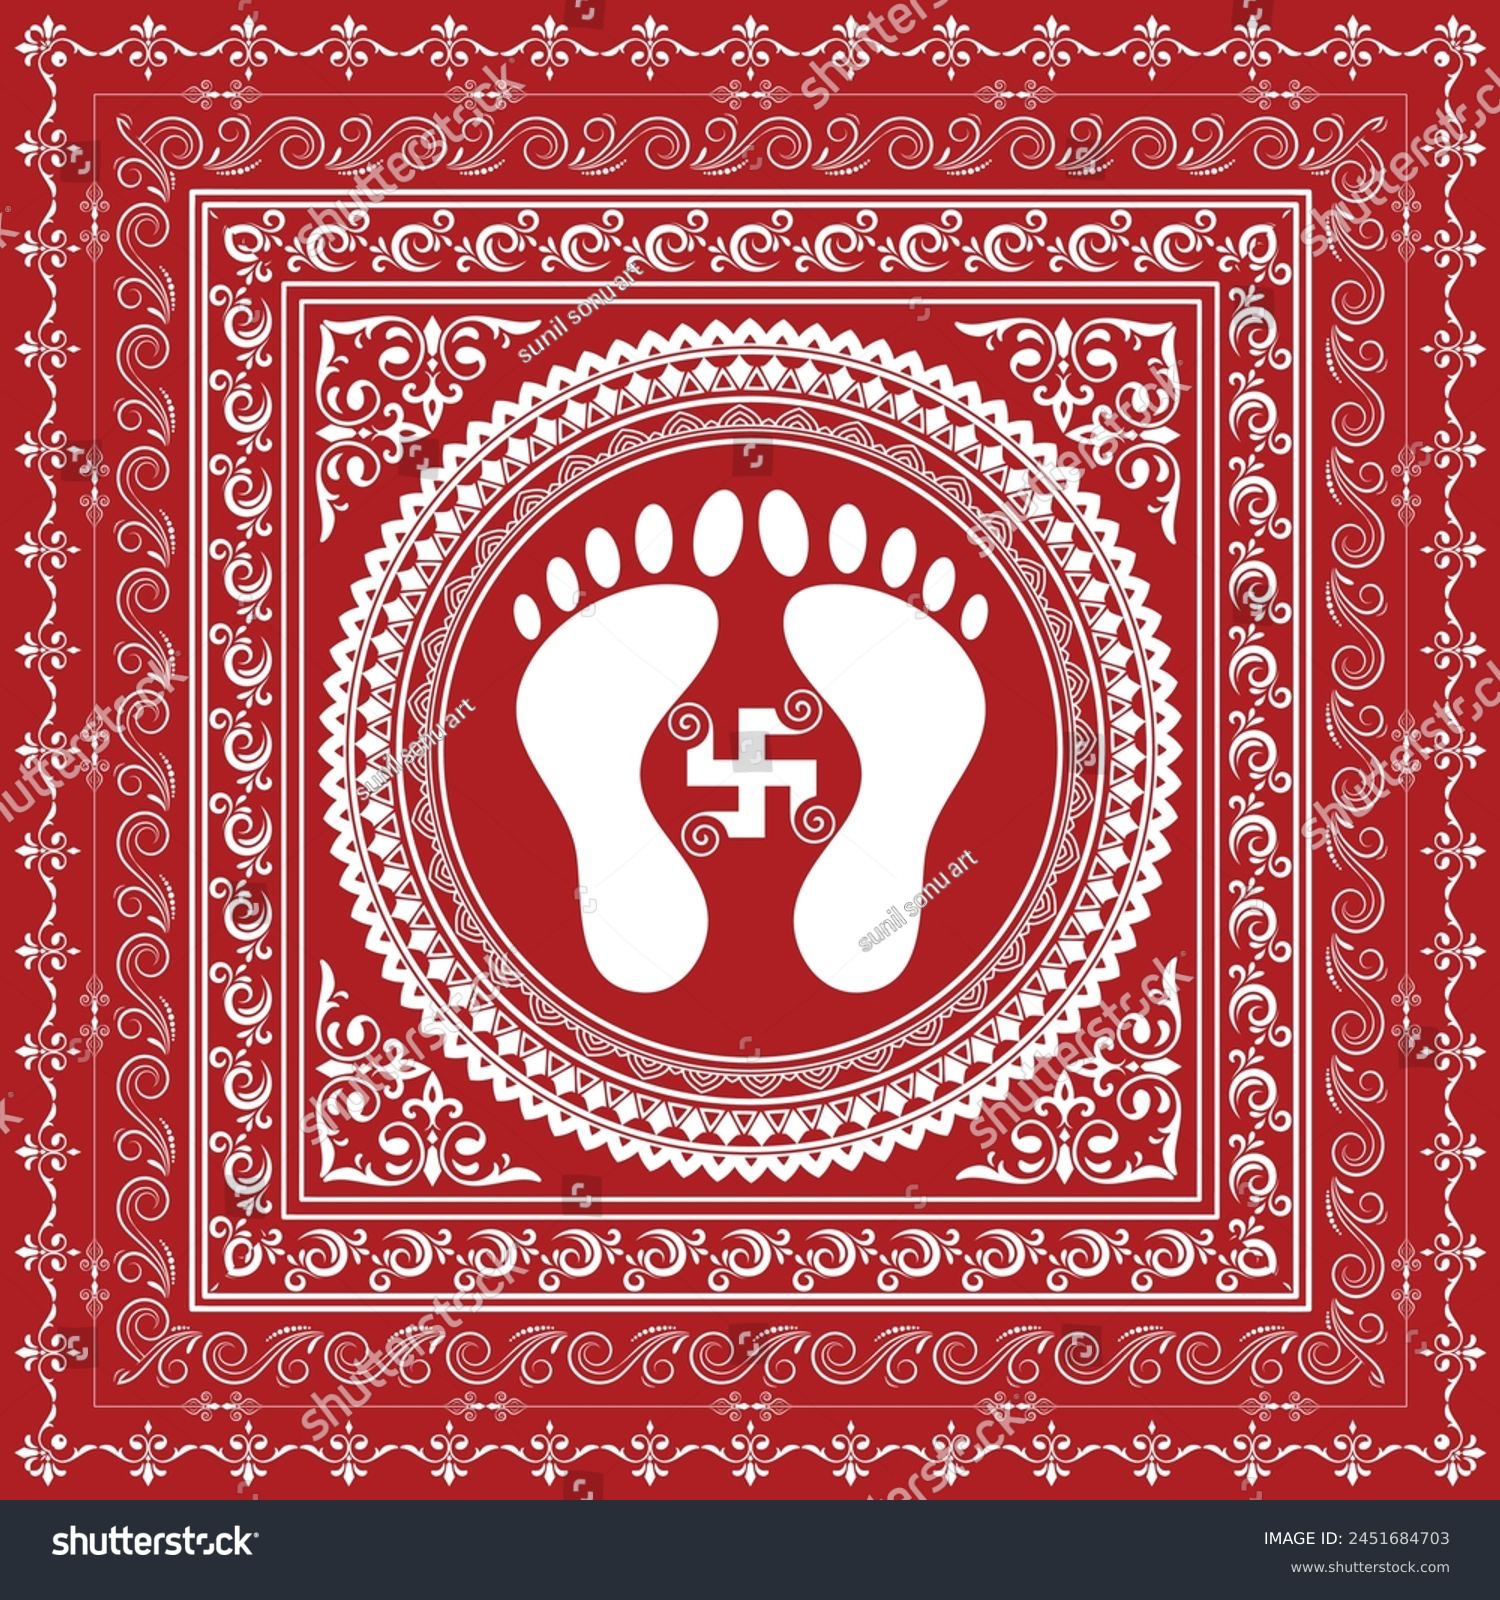 SVG of Aipan Design pattern for india festival vector red and white color	And footprints of Lakshmi Mata. svg